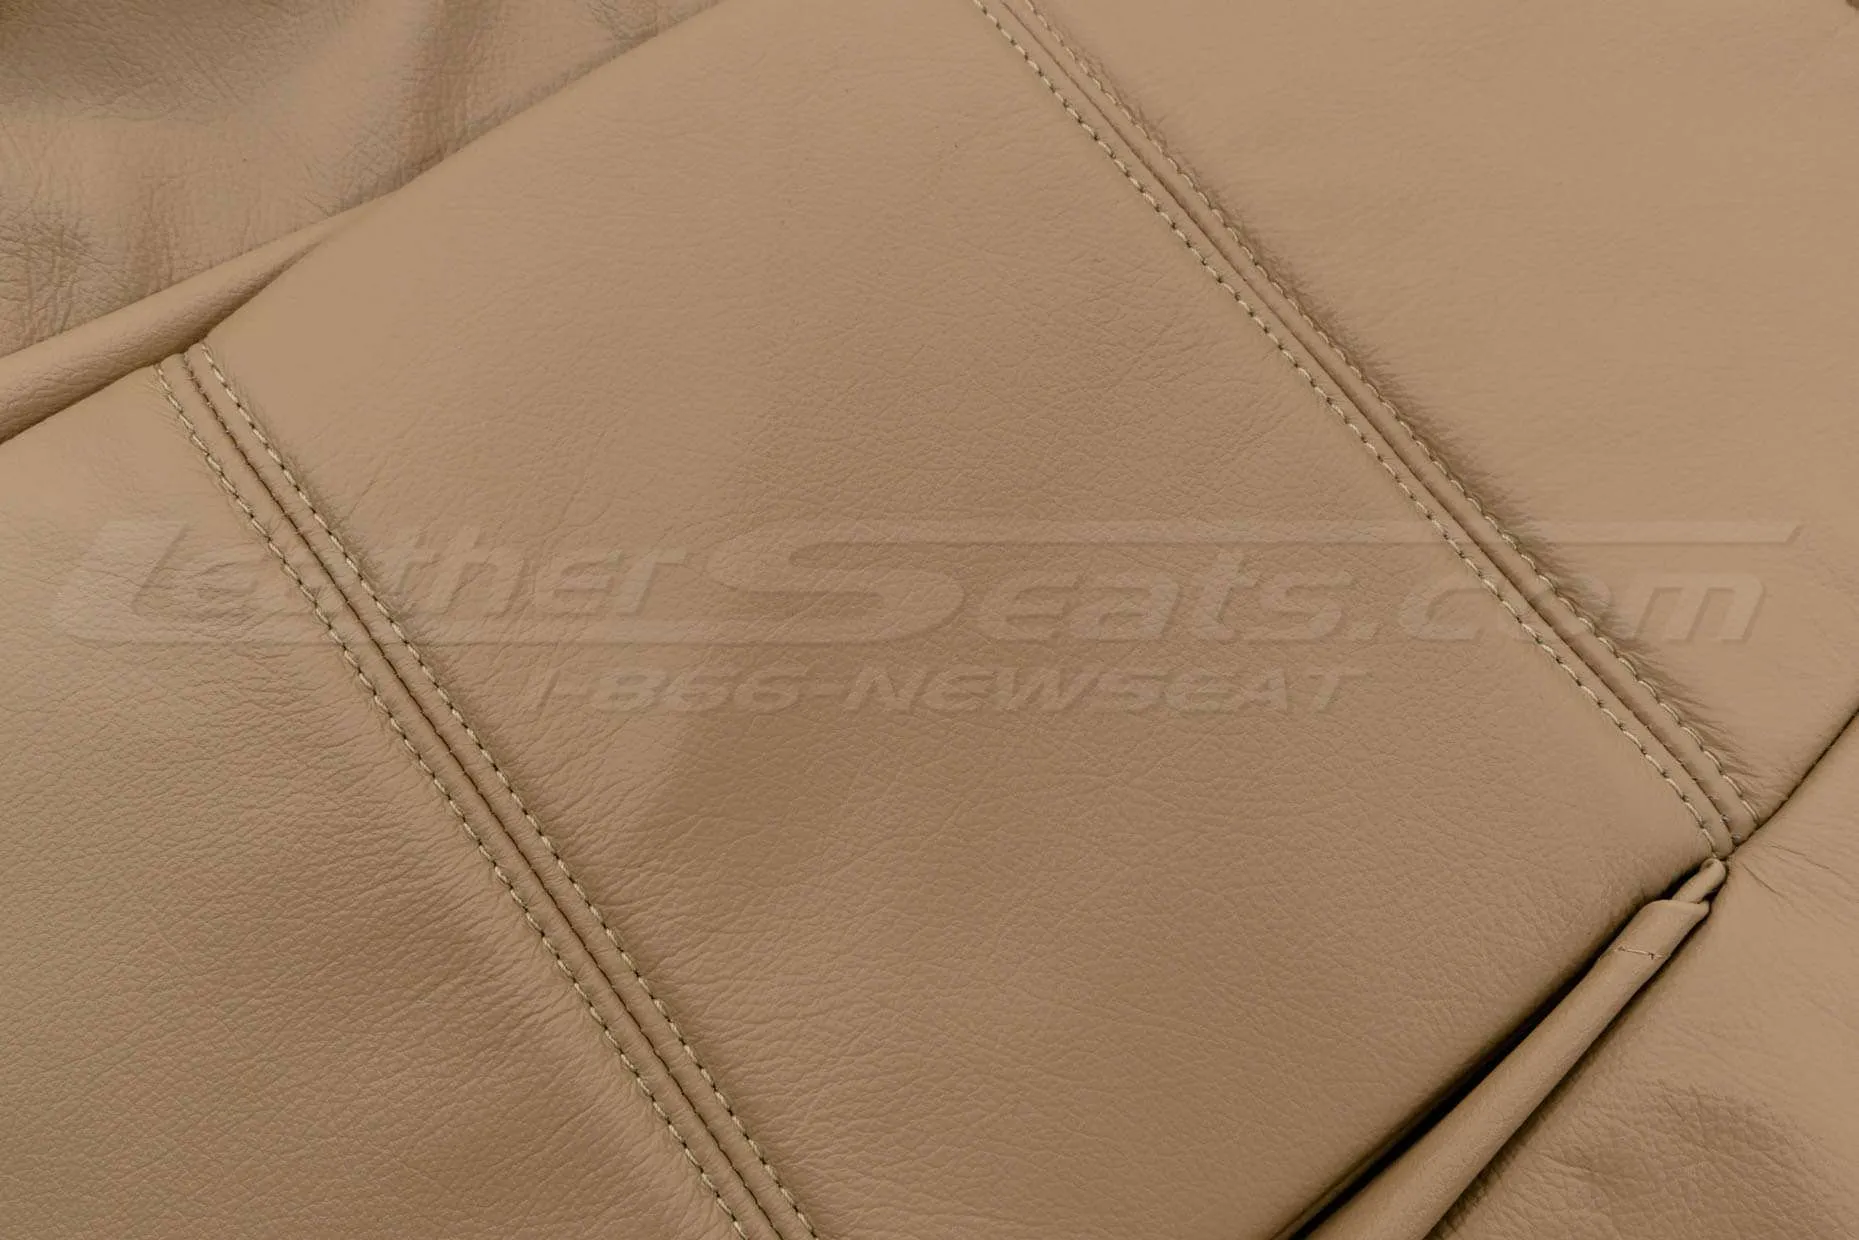 Insert leather texture close-up